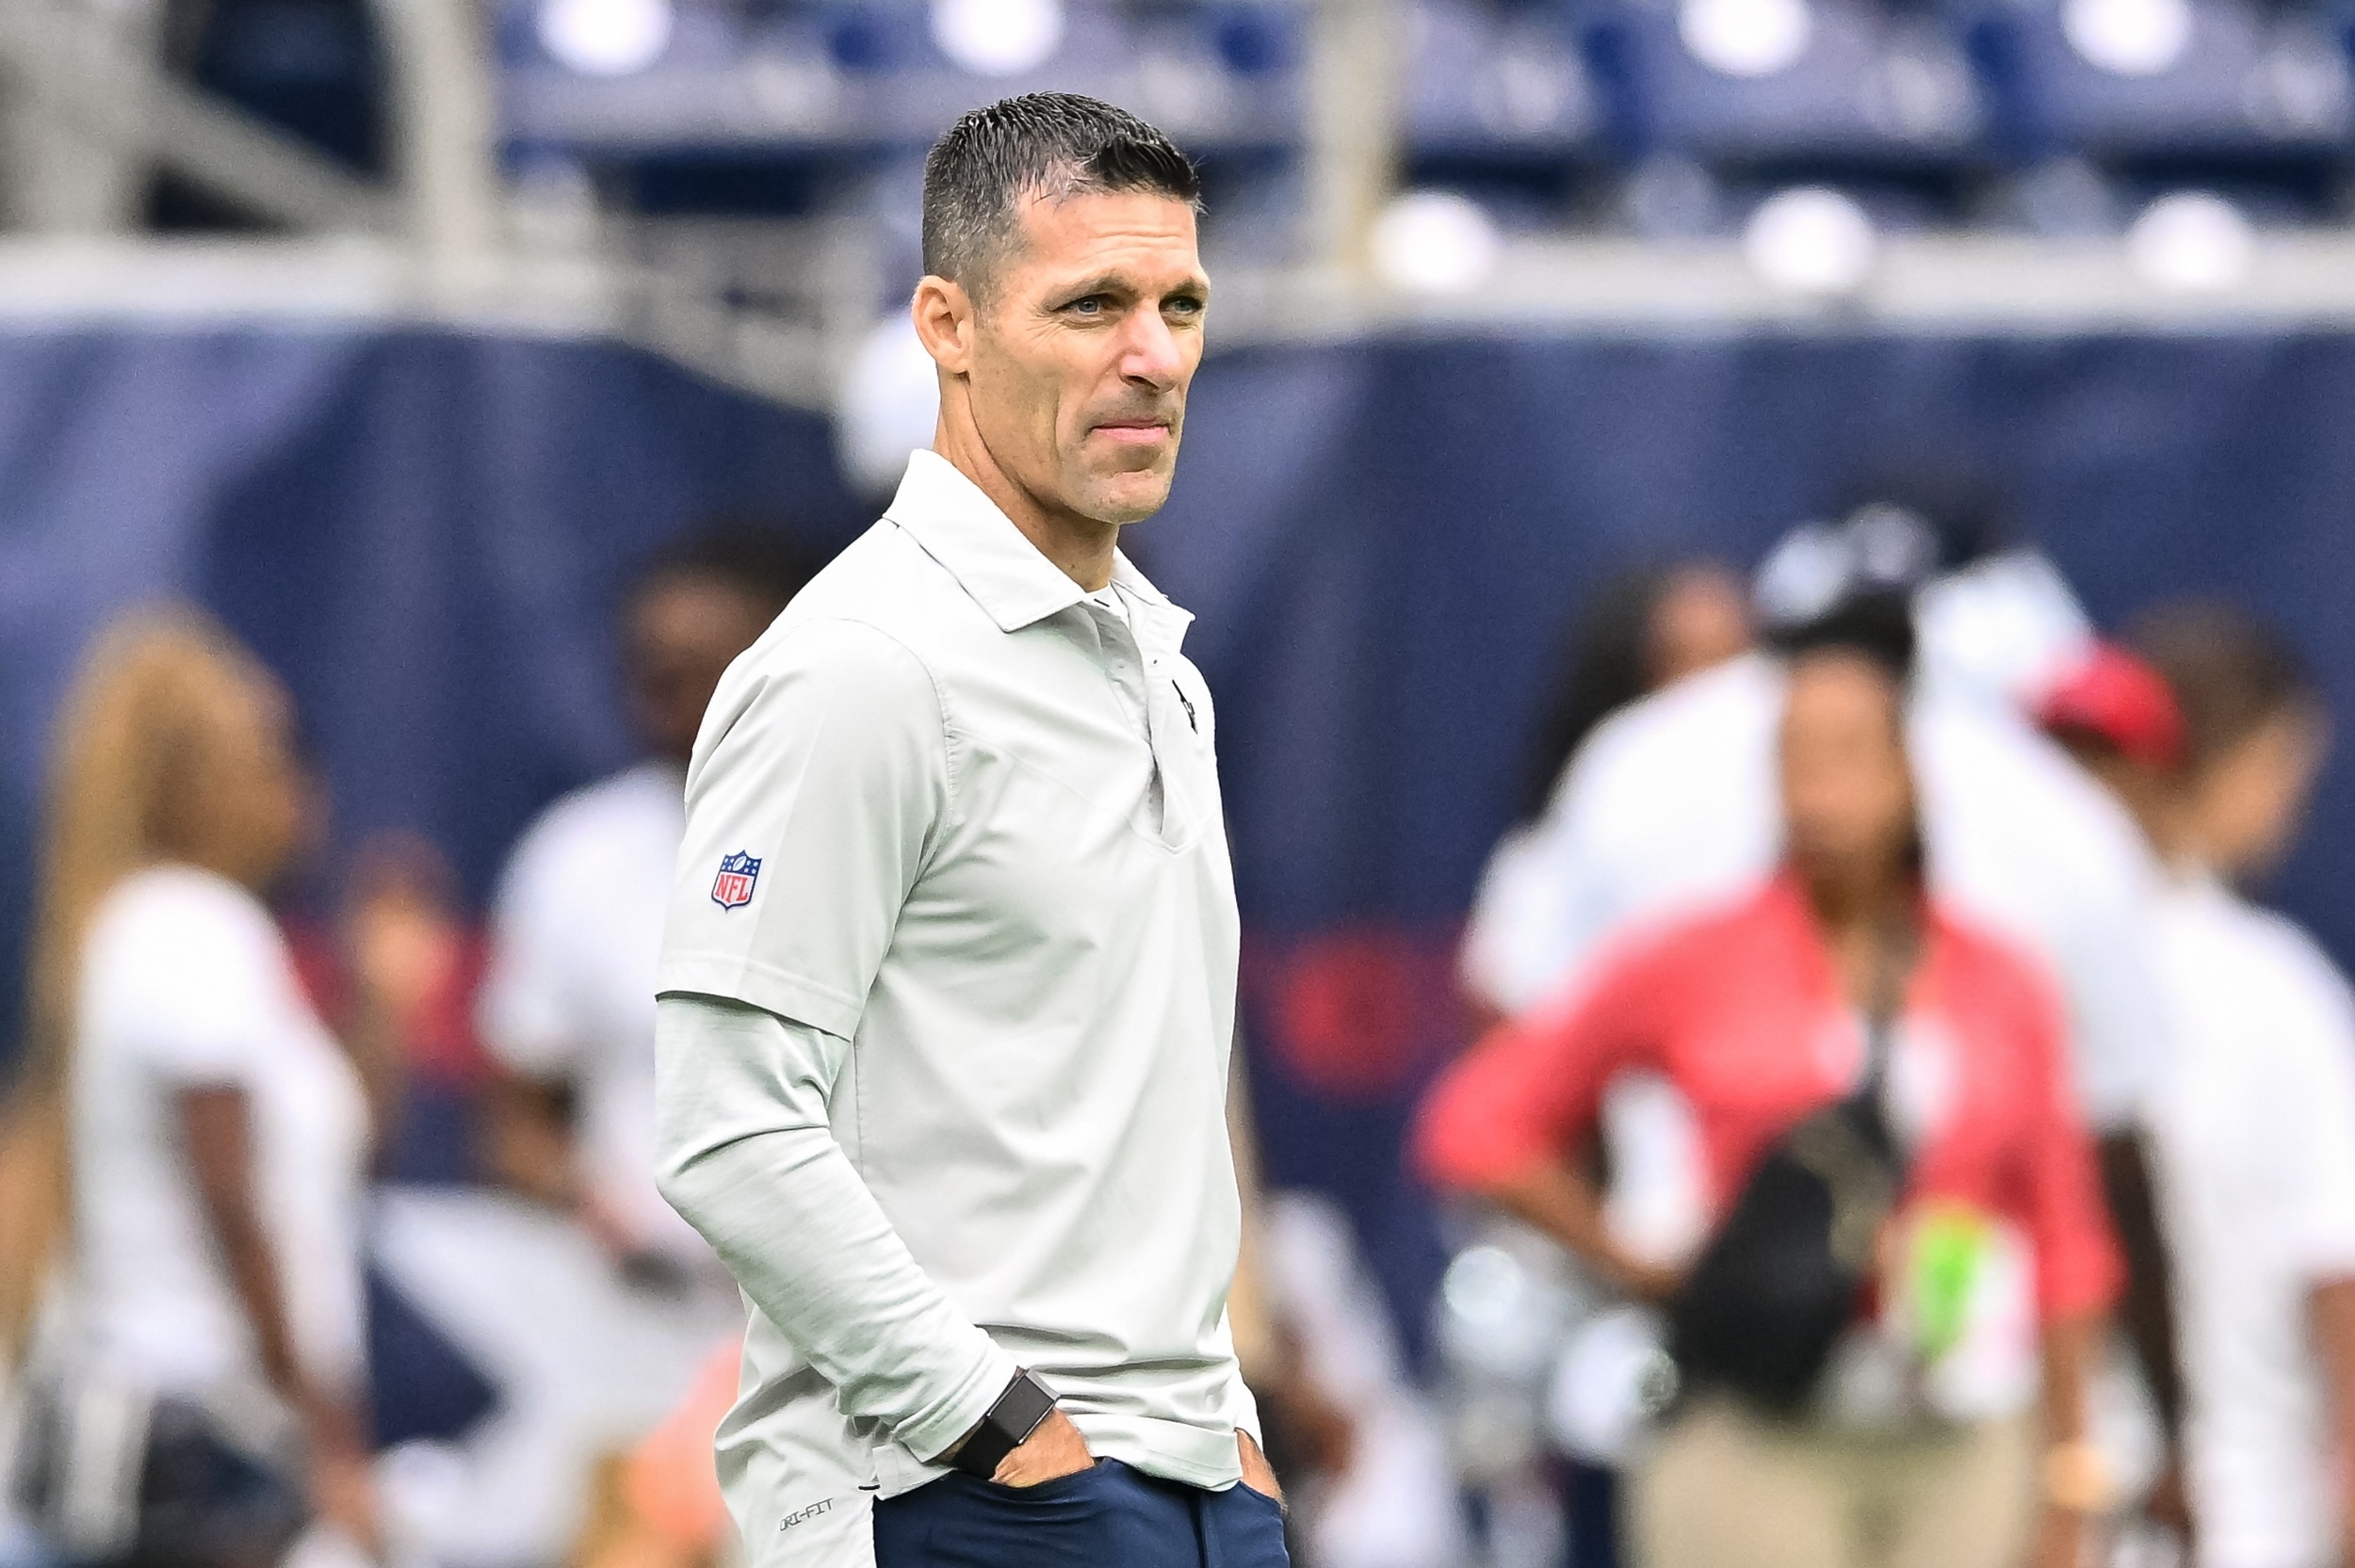 texans gm says praise organization is getting is a 'bunch of garbage'